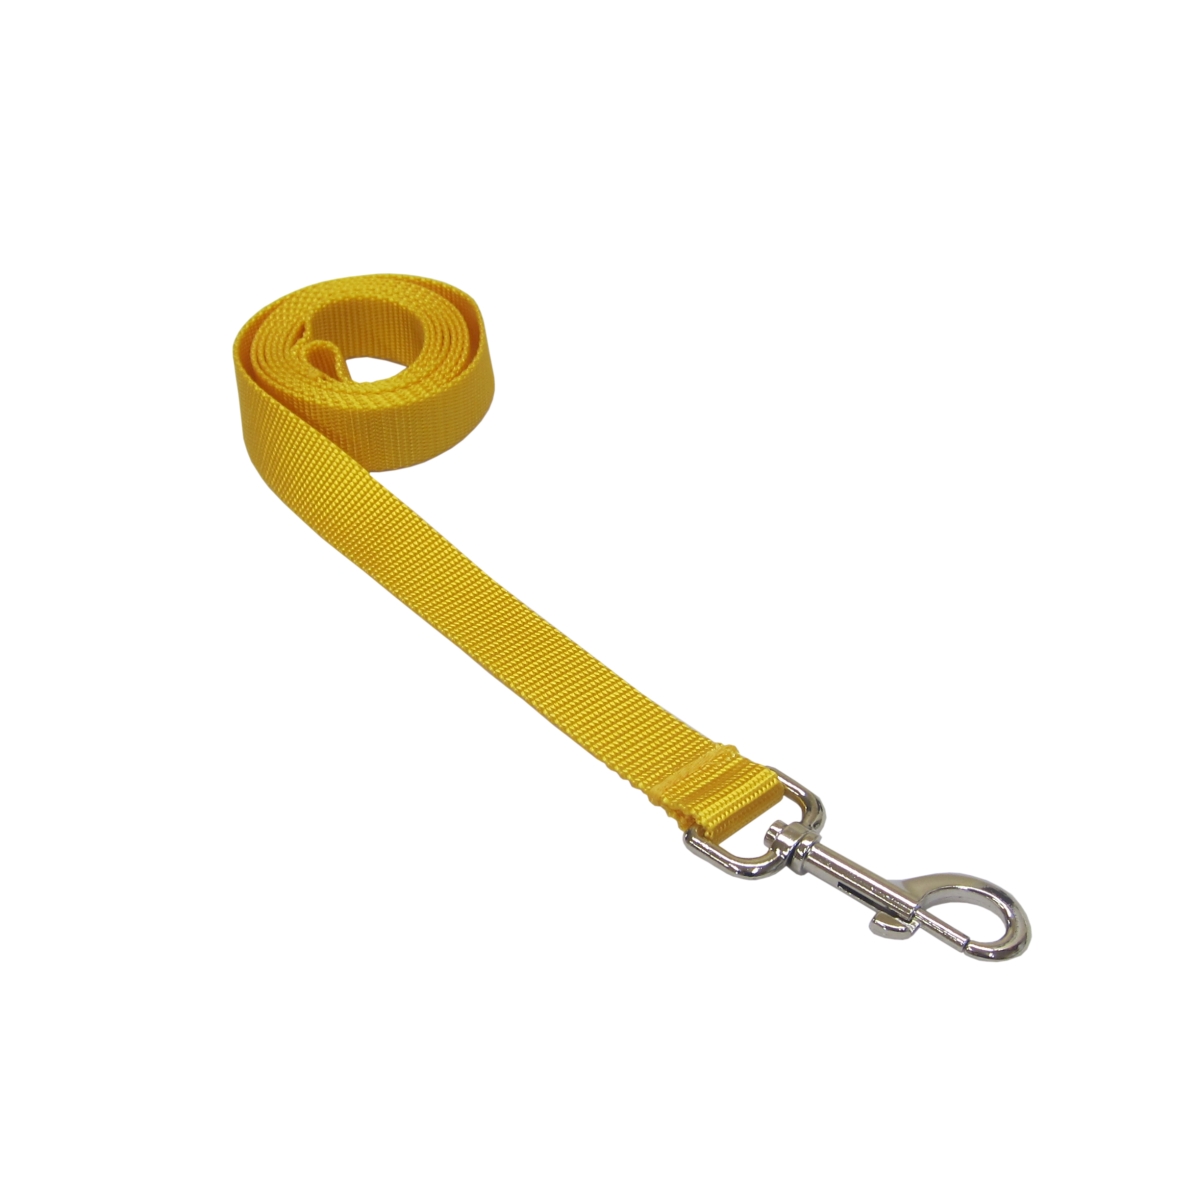 Picture of Sassy Dog Wear SOLID YELLOW LG-L Nylon Webbing Dog Leash - Large - Yellow